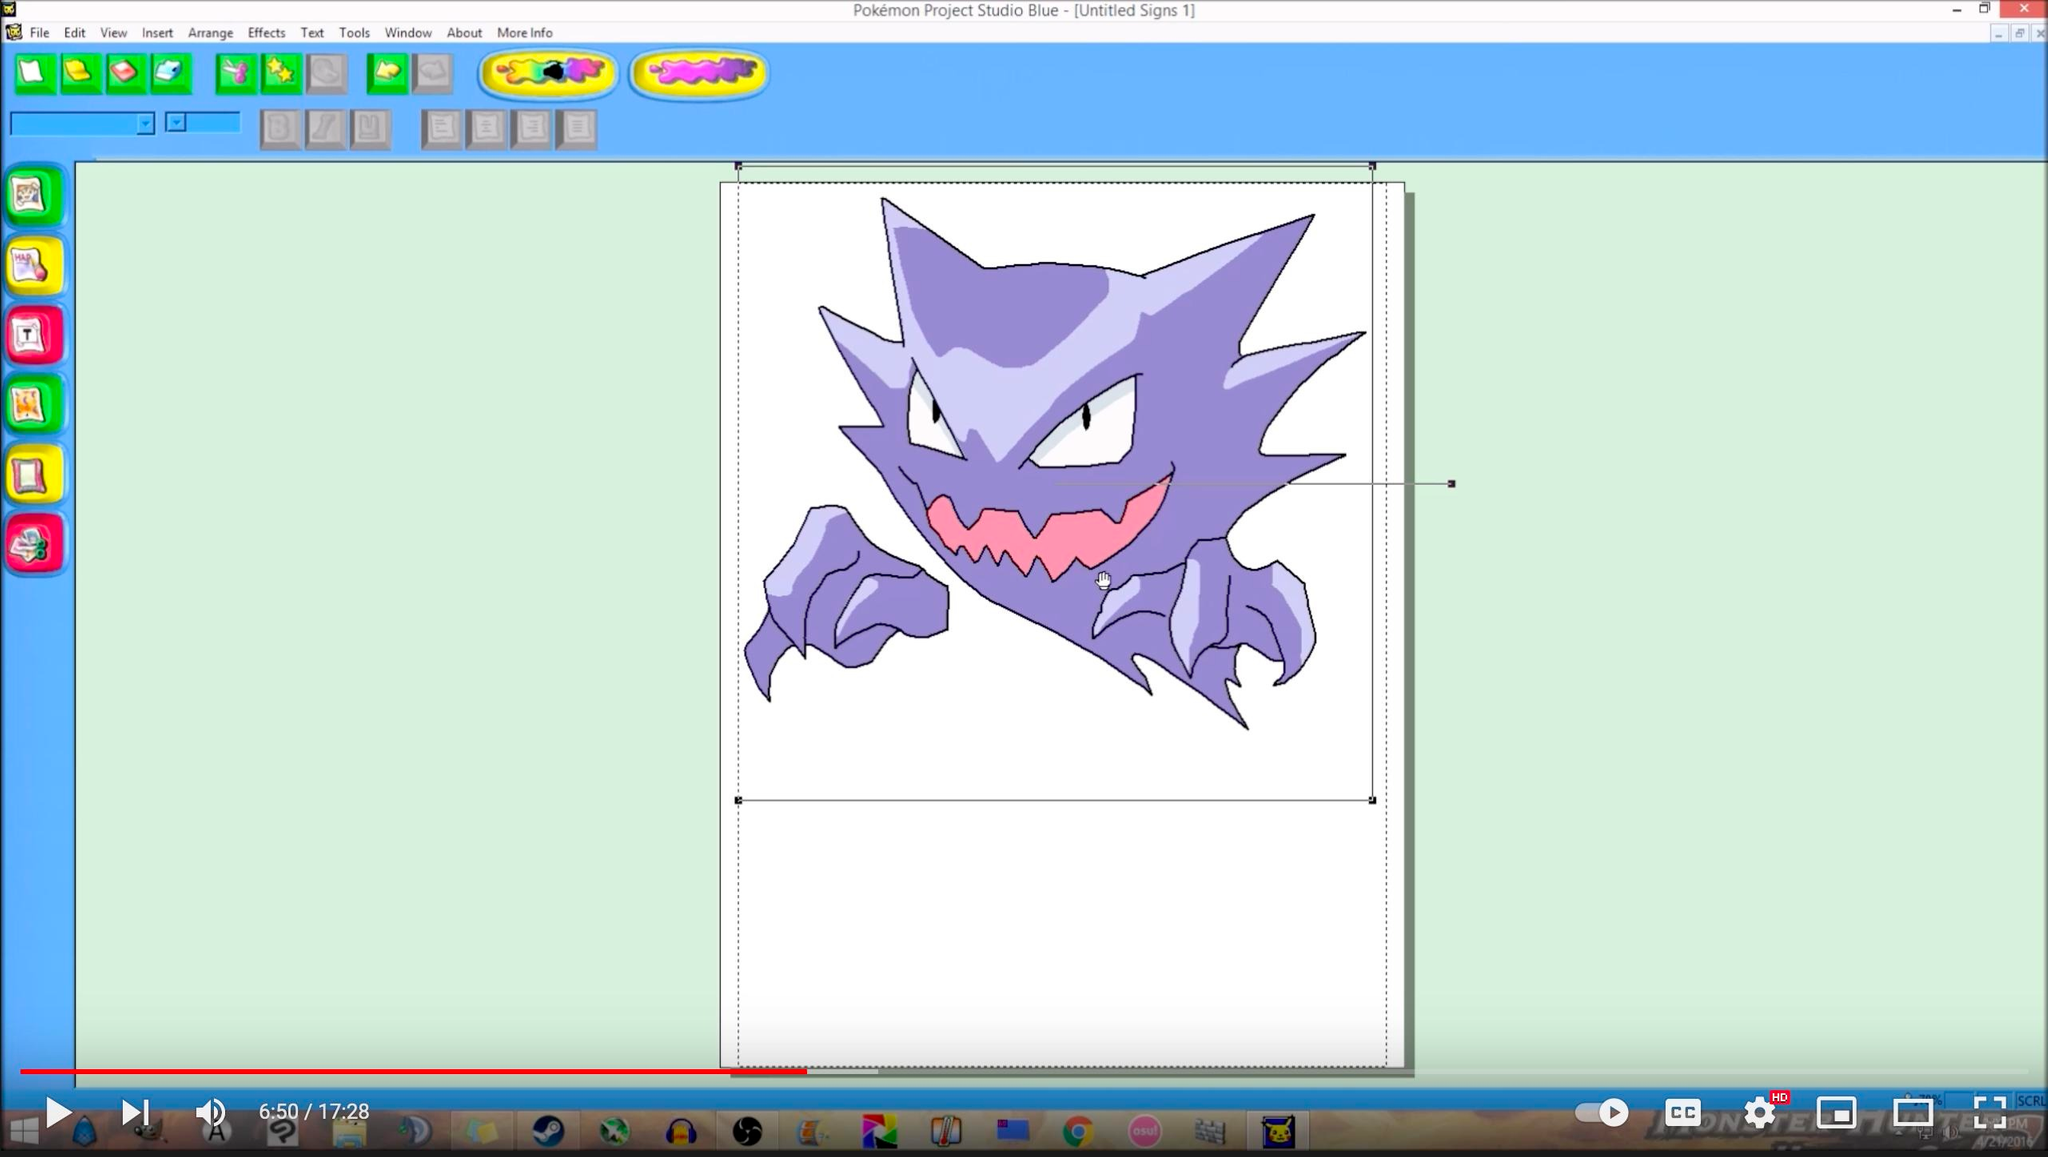 Picture of Pokemon Project Studio Blue interface